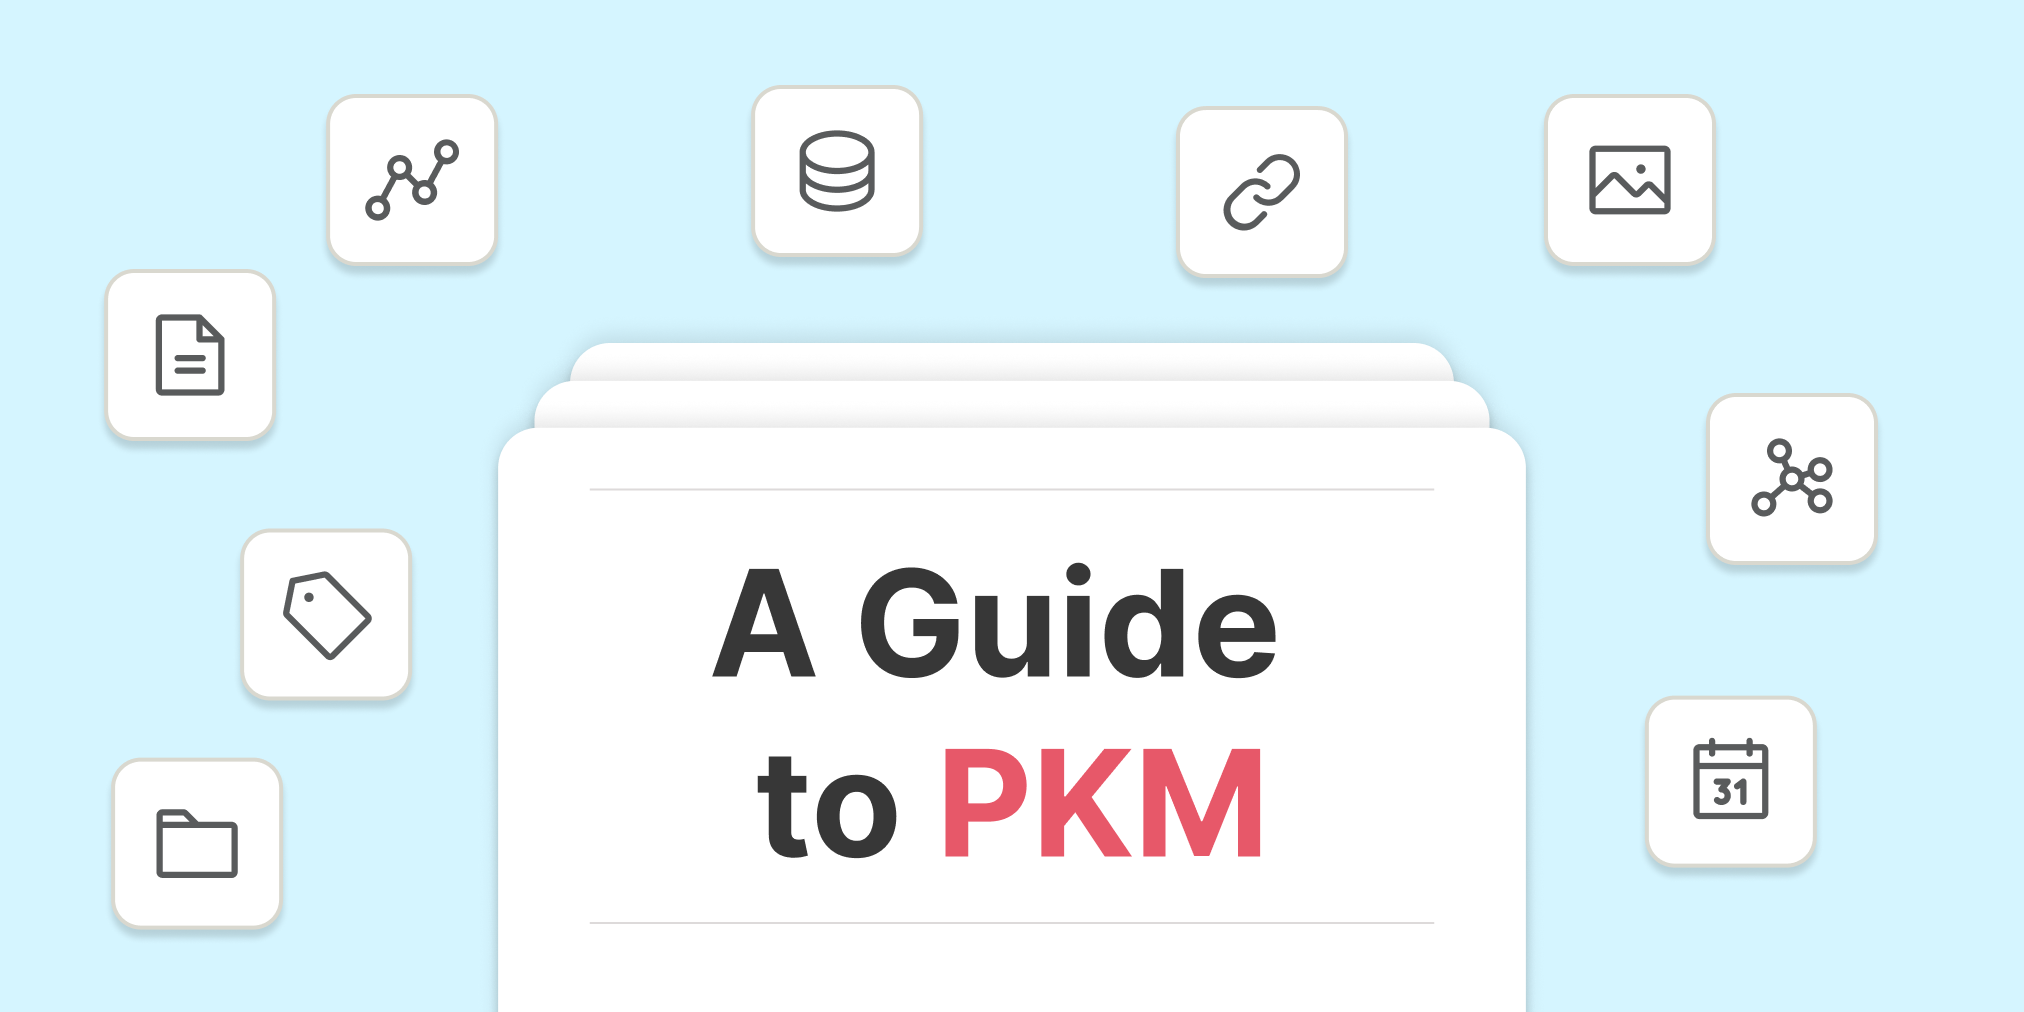 In this guide, we will show you how to do PKM with Capacities. We’ll explain different concepts and show you how to create your workflow in Capacities.